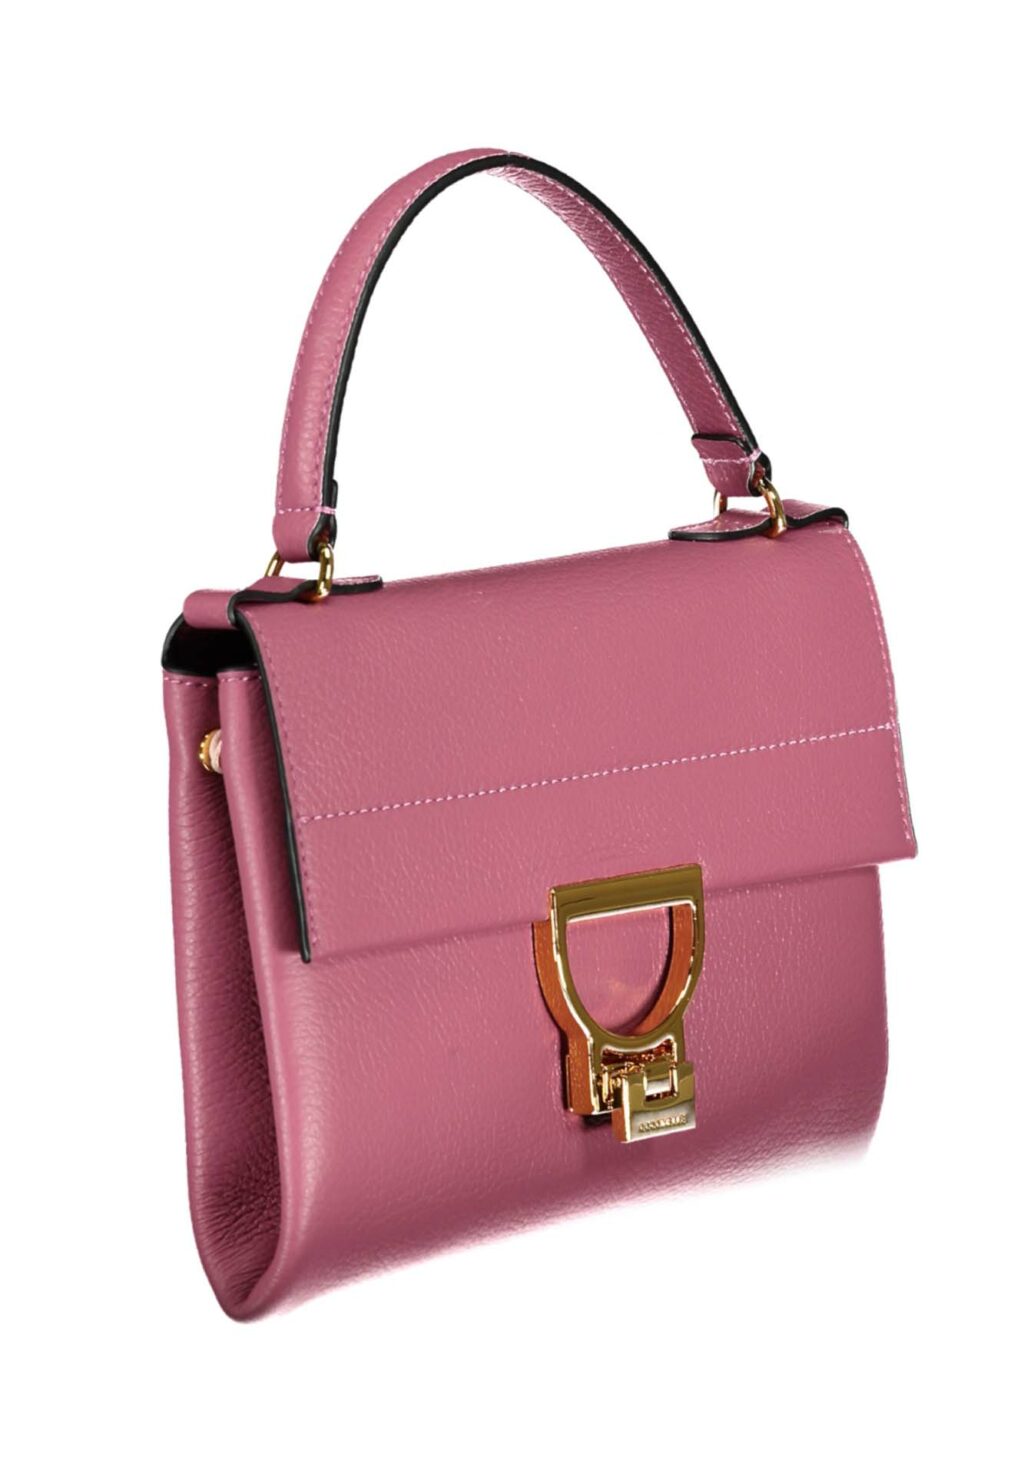 COCCINELLE PINK WOMEN'S BAG E1MD5190301_RSV48